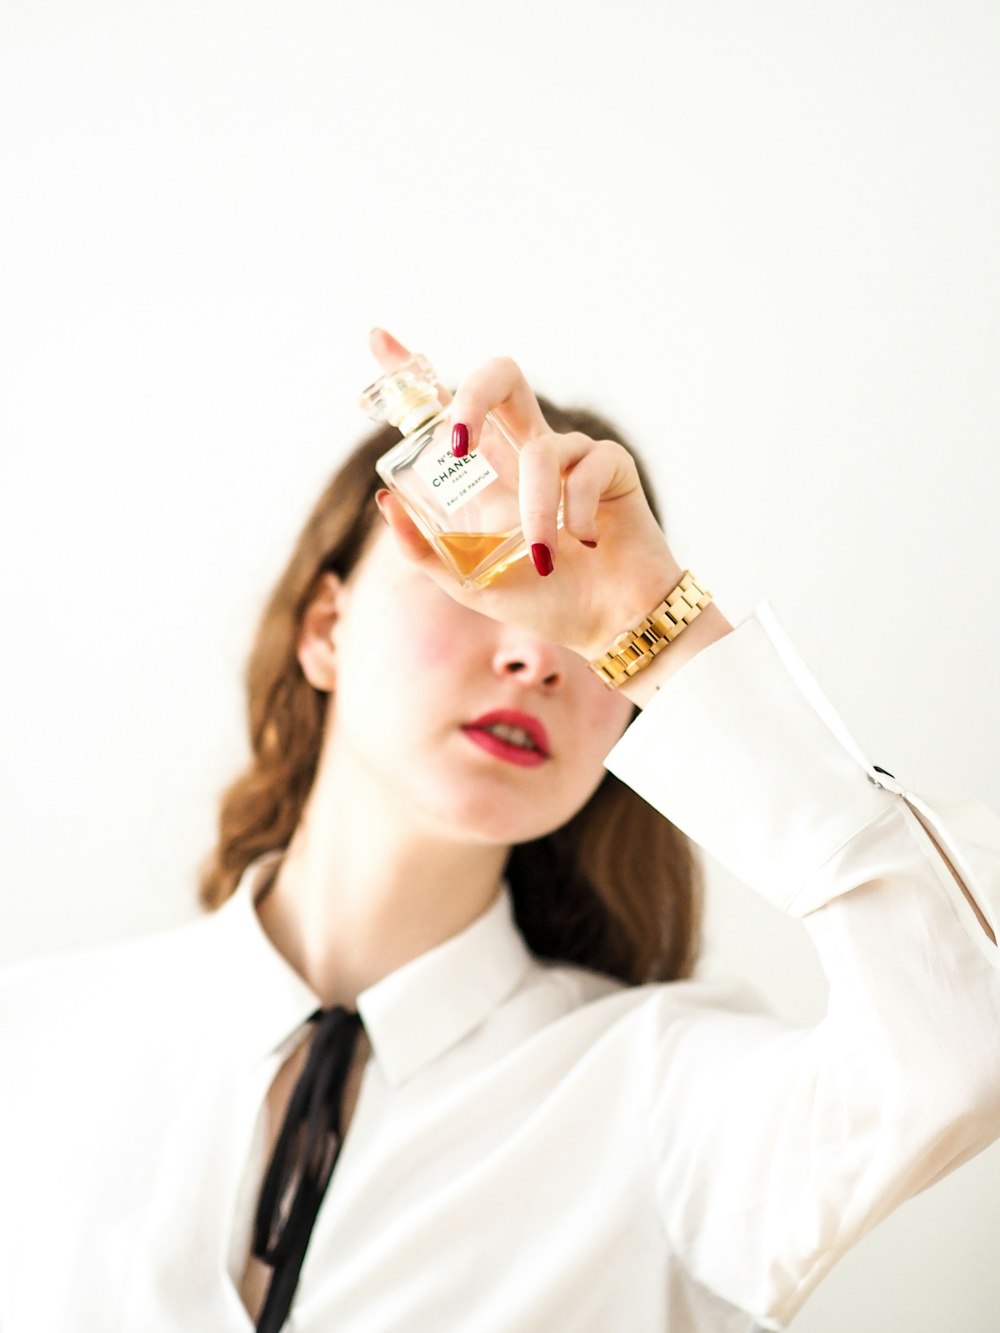 woman in white dress shirt holding clear glass bottle